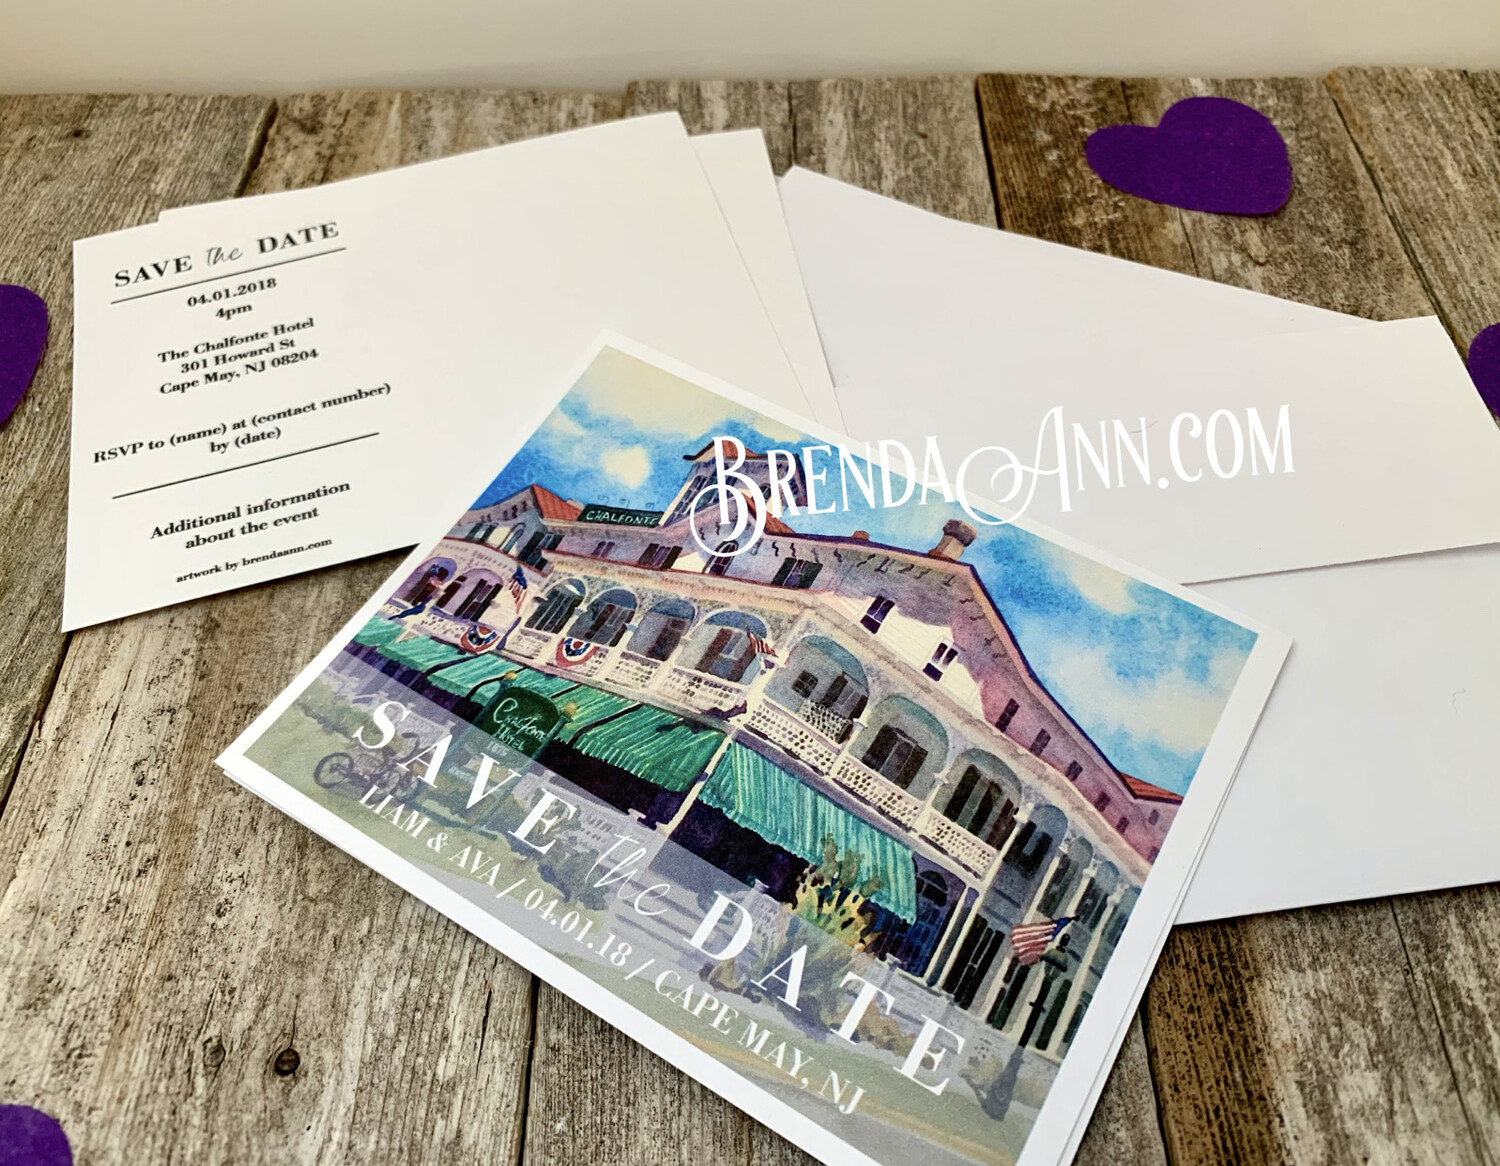 Chalfonte Hotel Wedding Save the Date Cards 